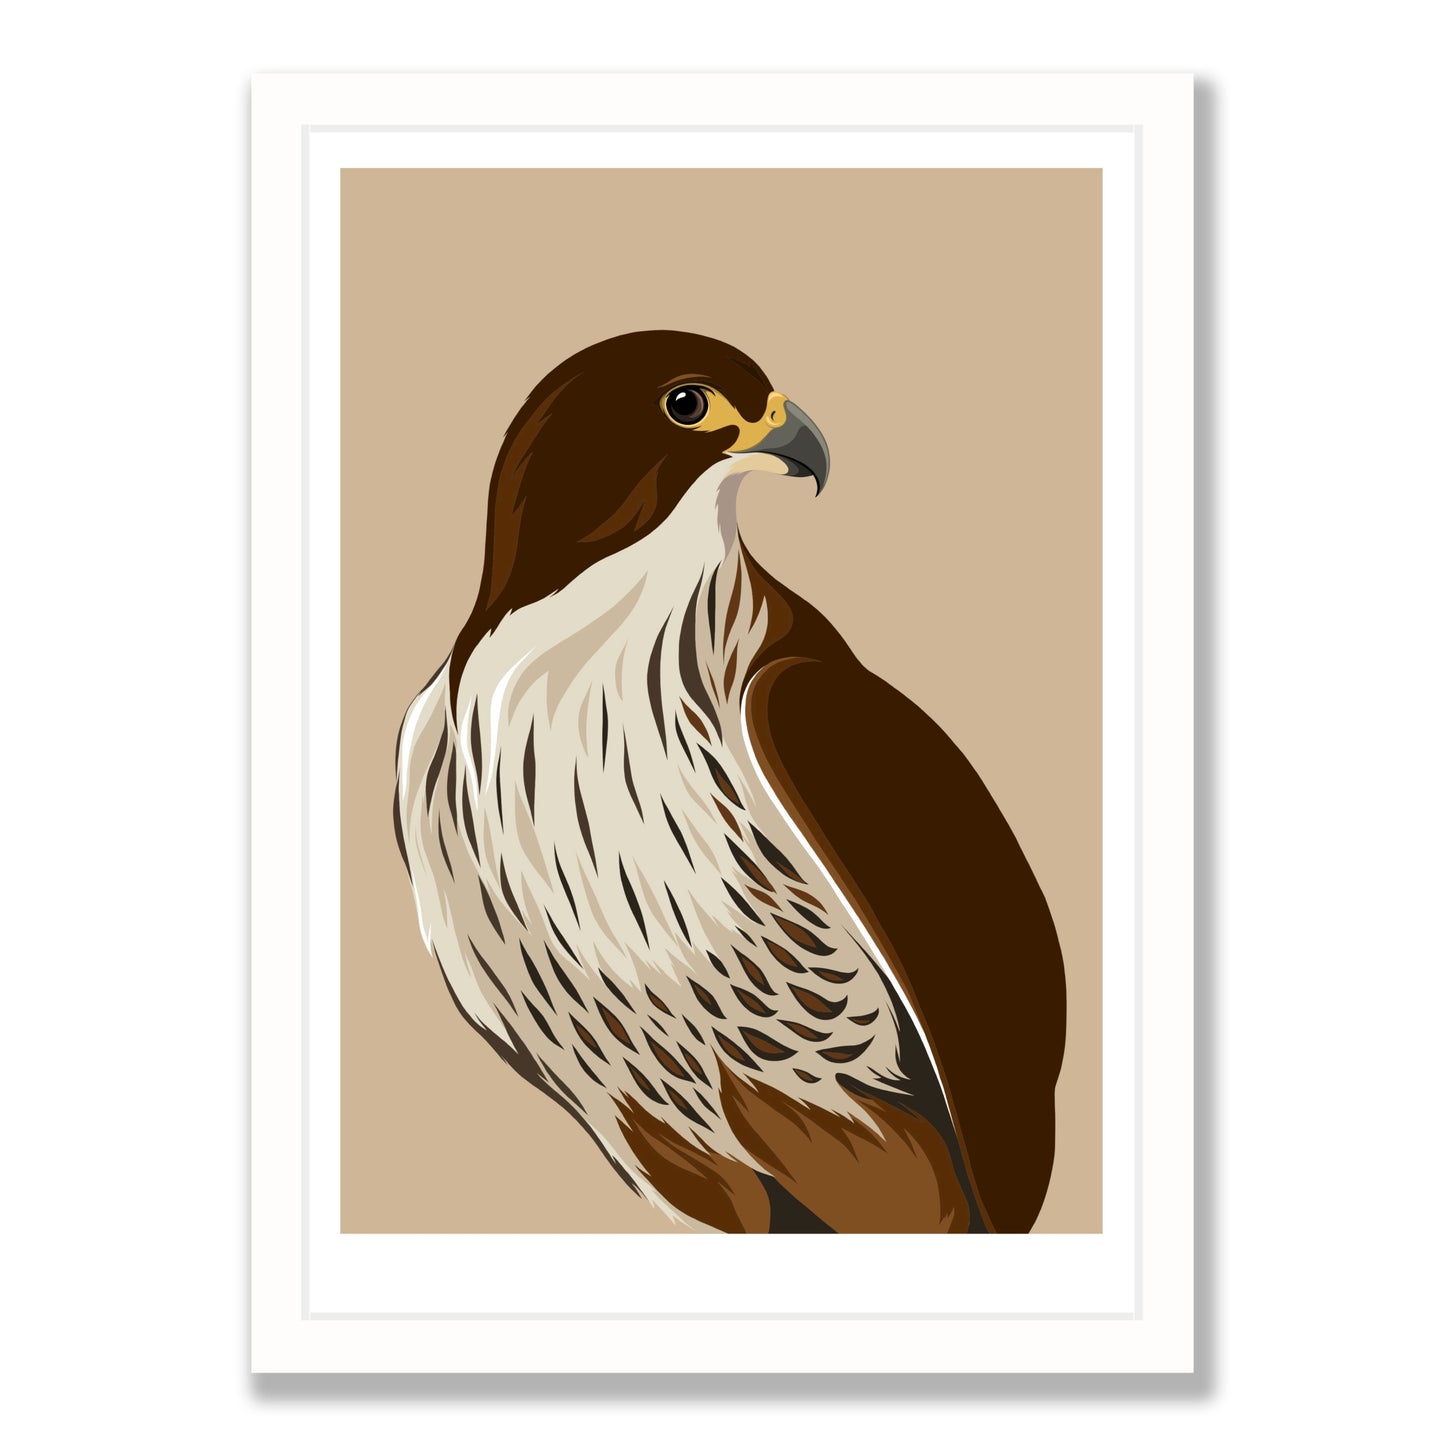 Falcon caramel art print in white frame, by NZ artist Hansby Design